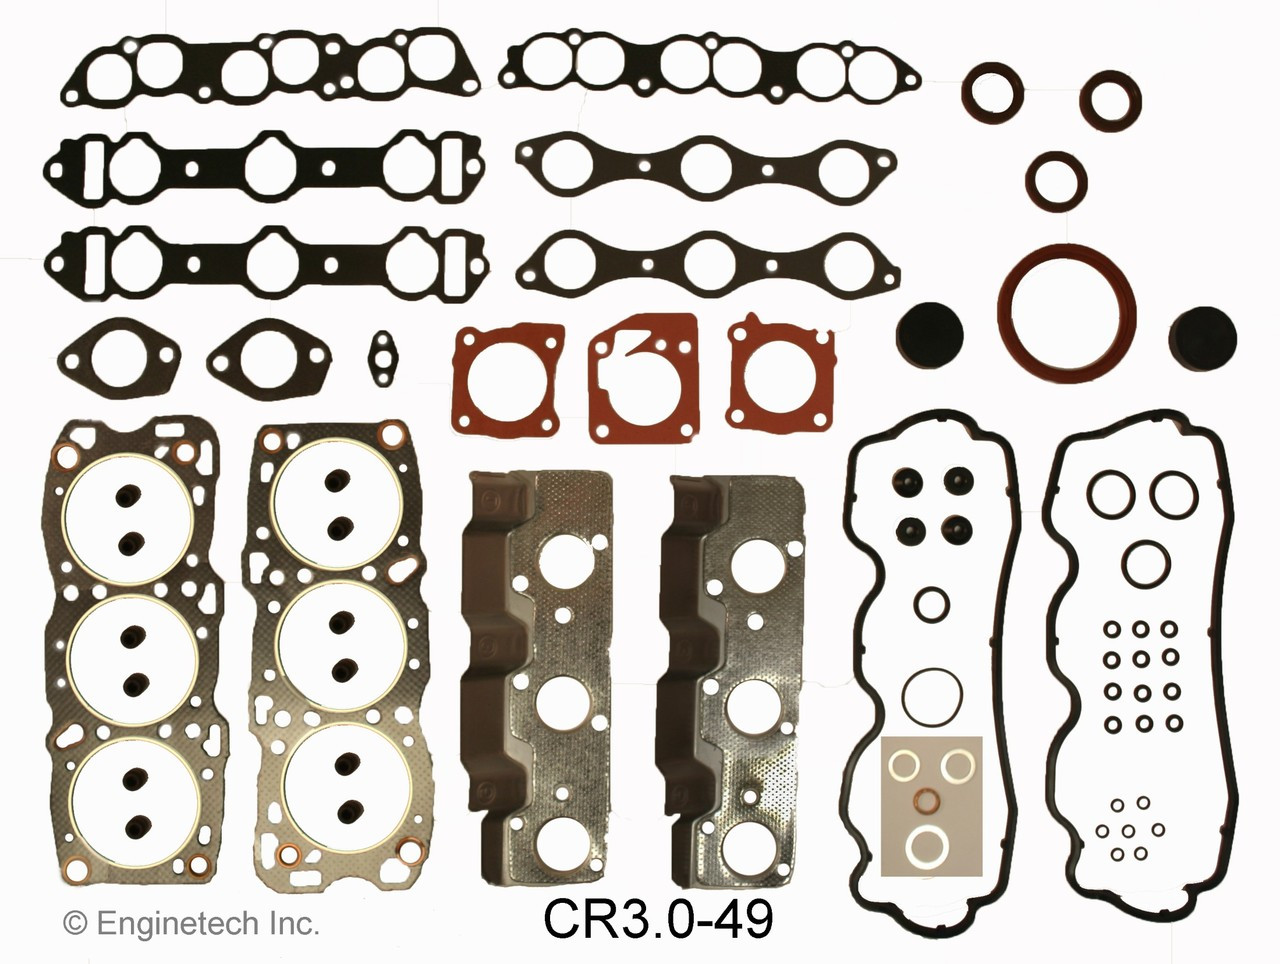 2000 Plymouth Grand Voyager 3.0L Engine Gasket Set CR3.0-49 -101